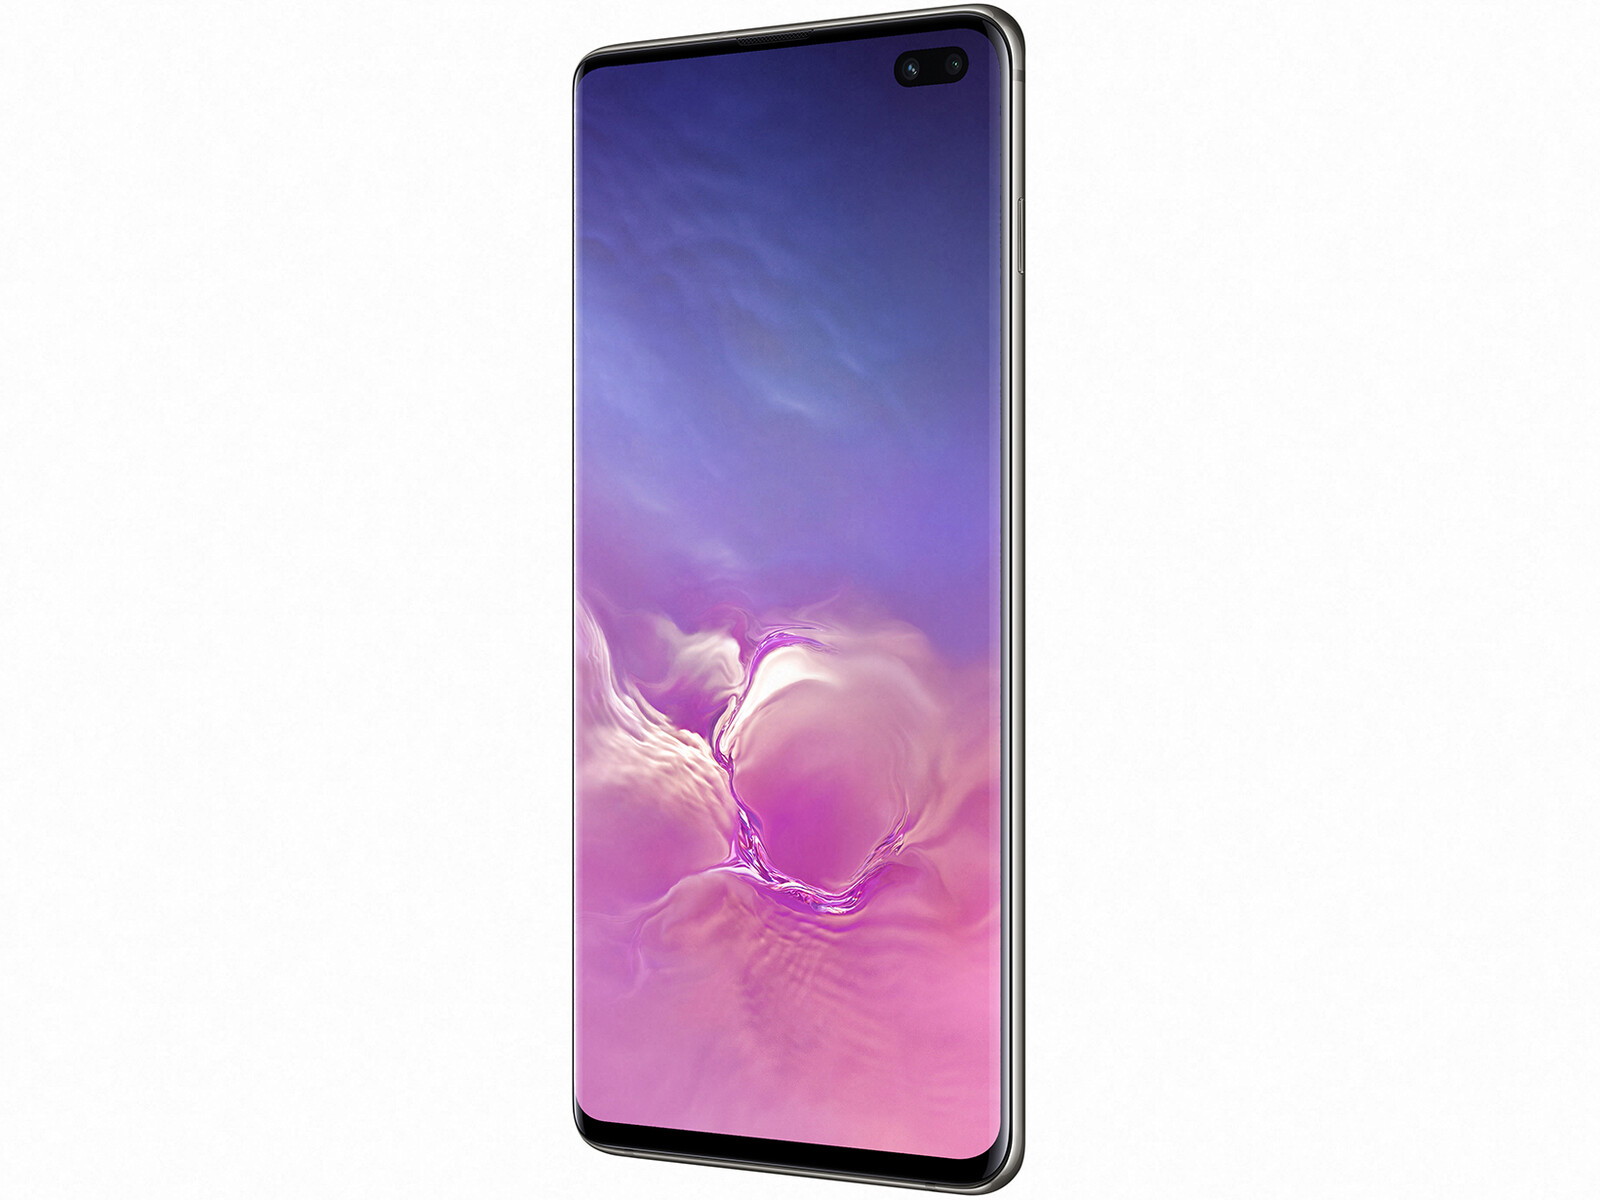 Galaxy S10, S10+ and S10e release date, price, news and leaks - PhoneArena